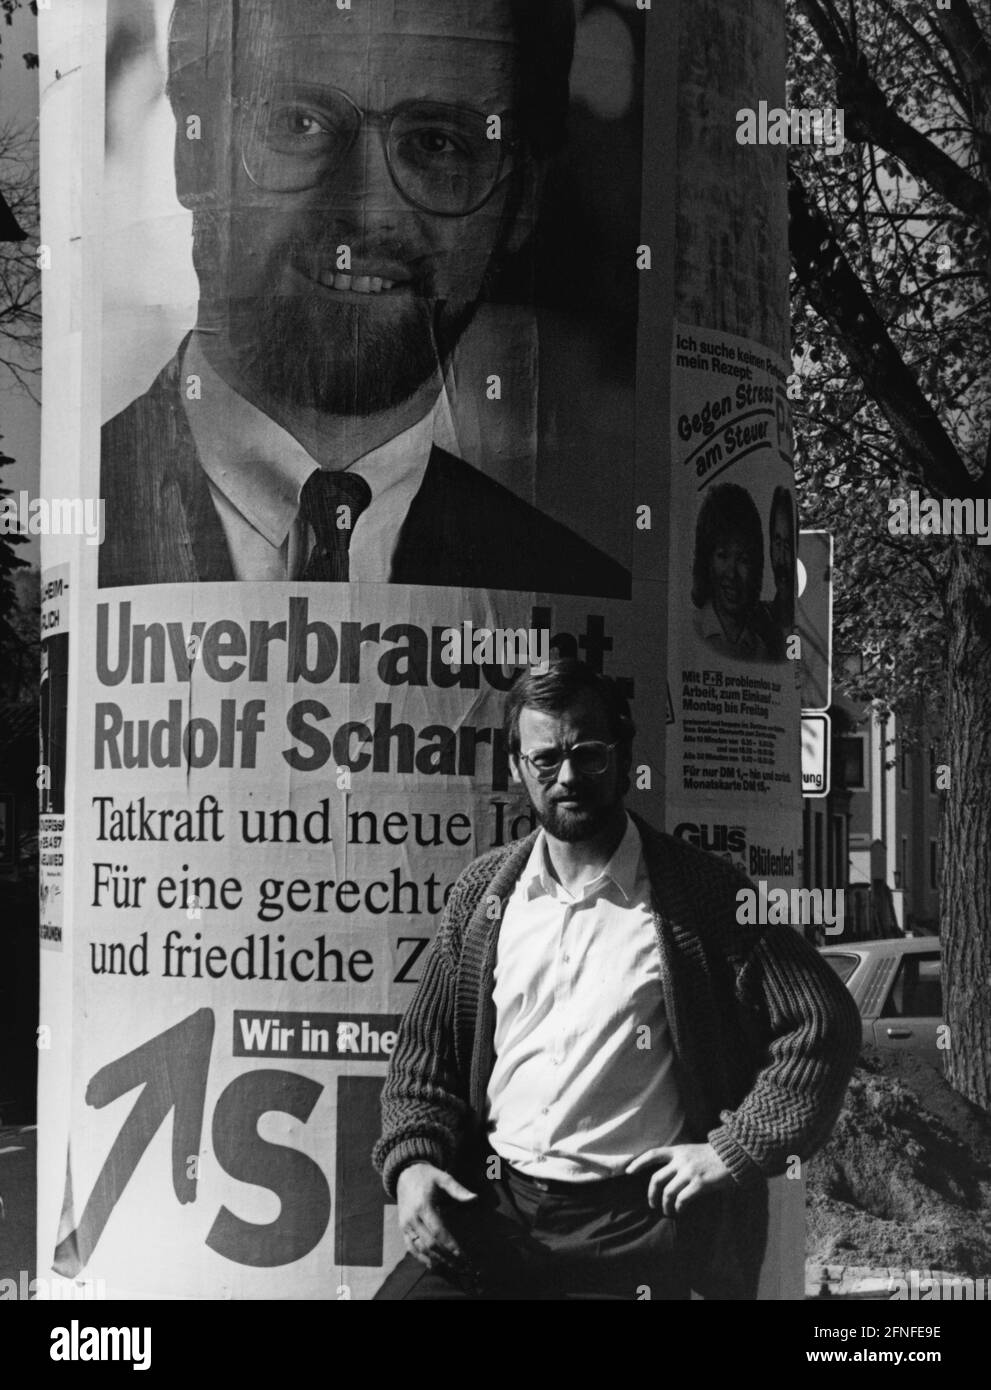 'Rudolf Scharping, SPD top candidate for the office of Minister President of Rhineland-Palatinate, in front of an SPD election poster with his likeness and the slogan ''Unverbraucht rudolf Scharping. Energy and new ideas. For a just and peaceful future.'' [automated translation]' Stock Photo